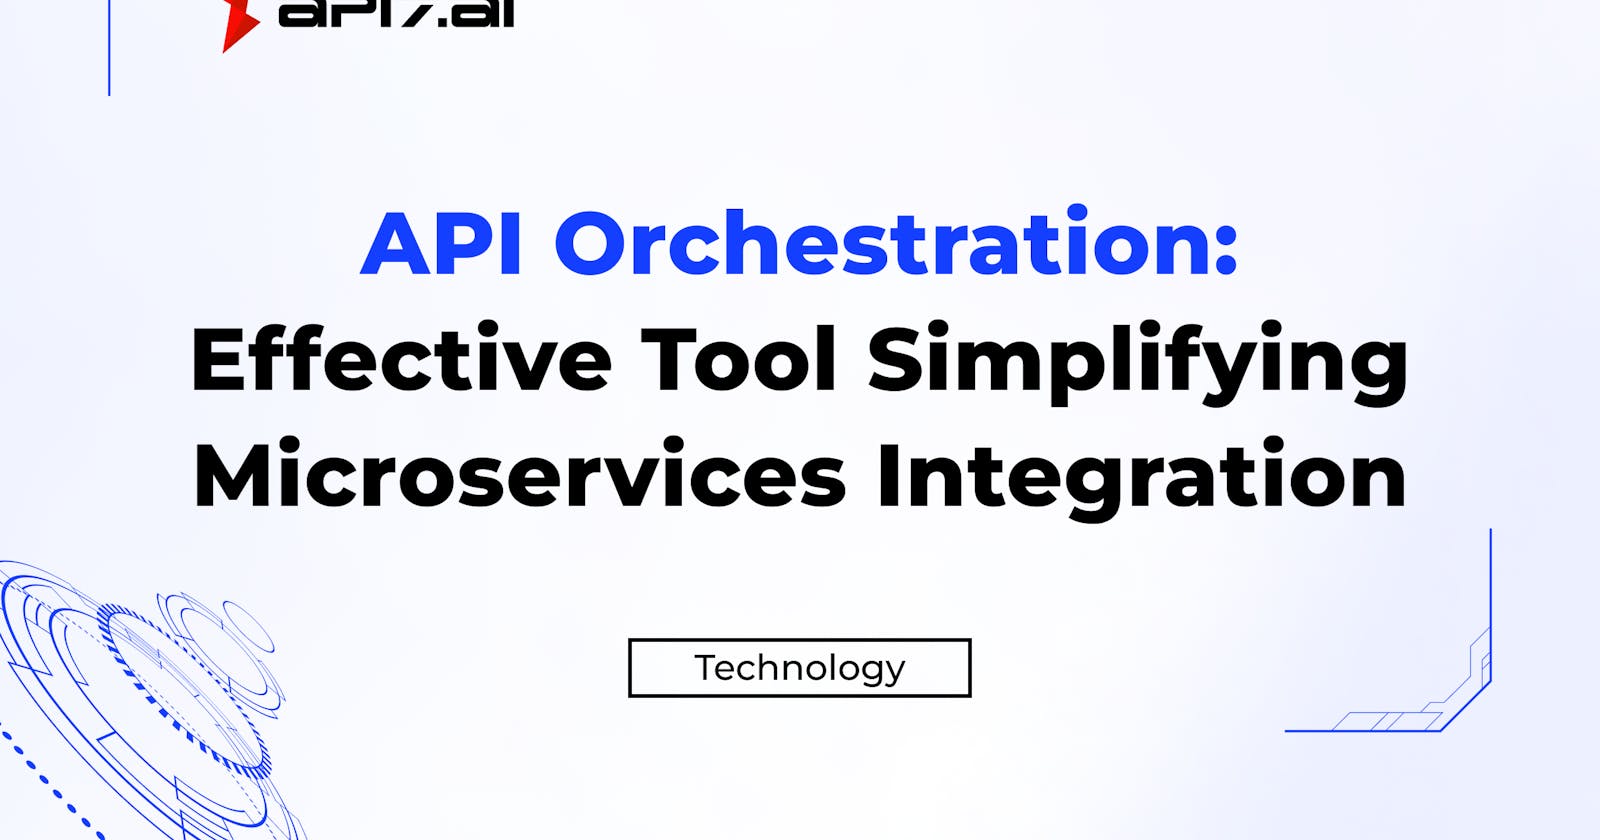 API Orchestration: An Effective Tool Simplifying Microservices Integration